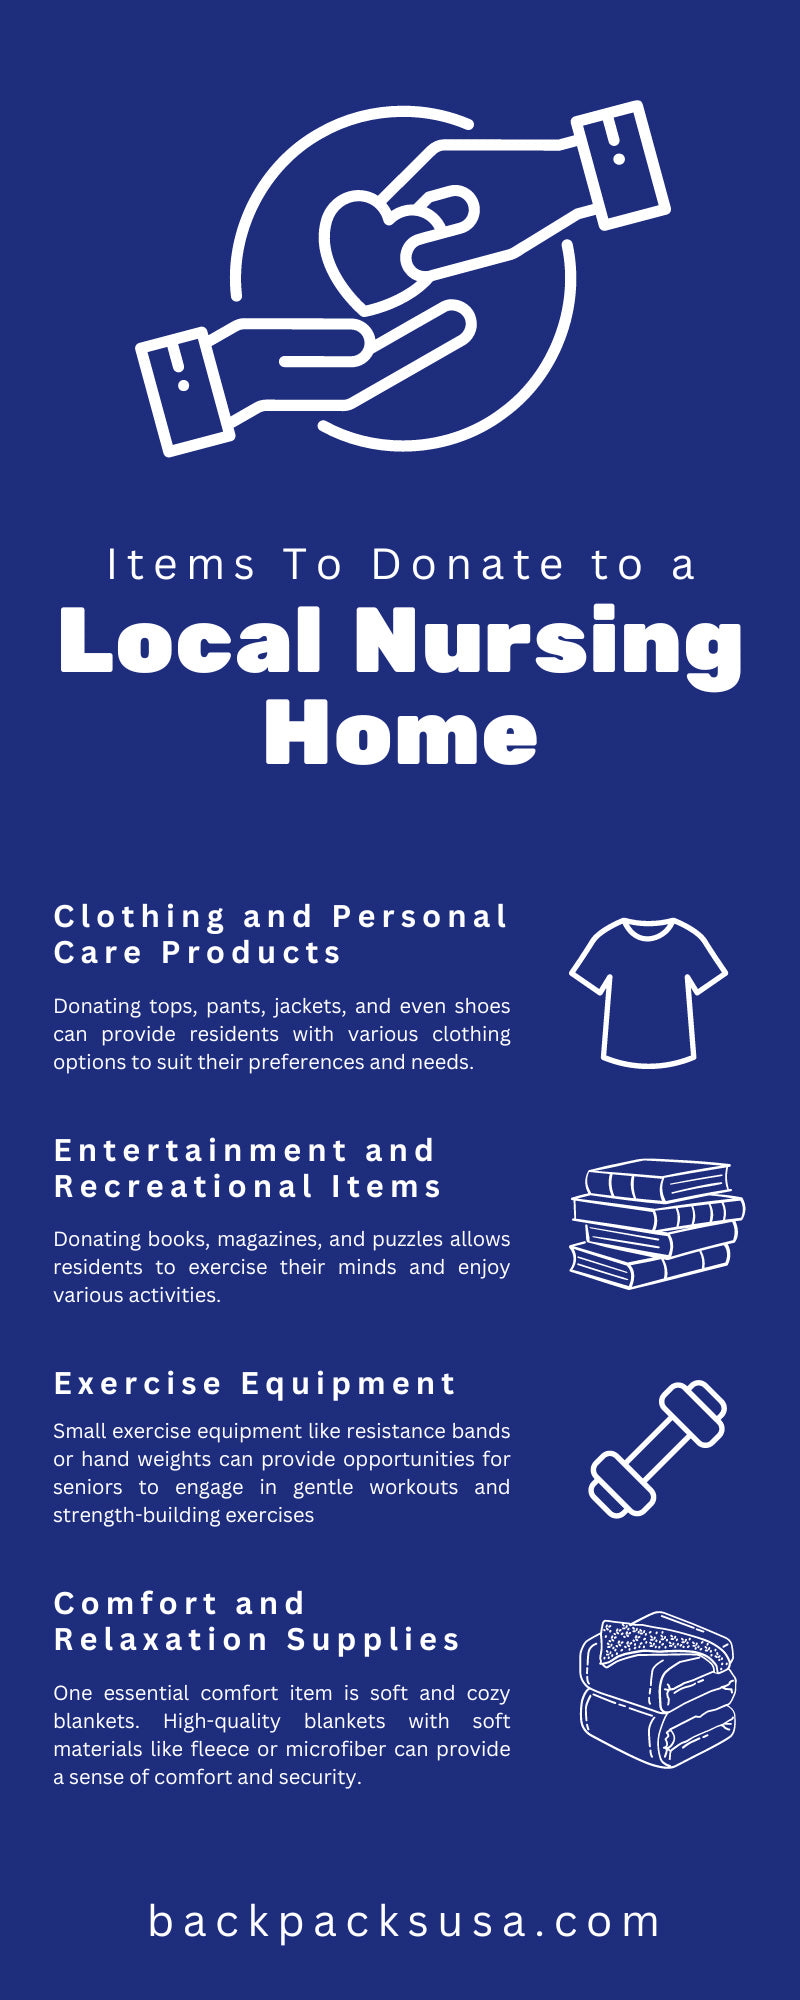 7 Items To Donate to a Local Nursing Home